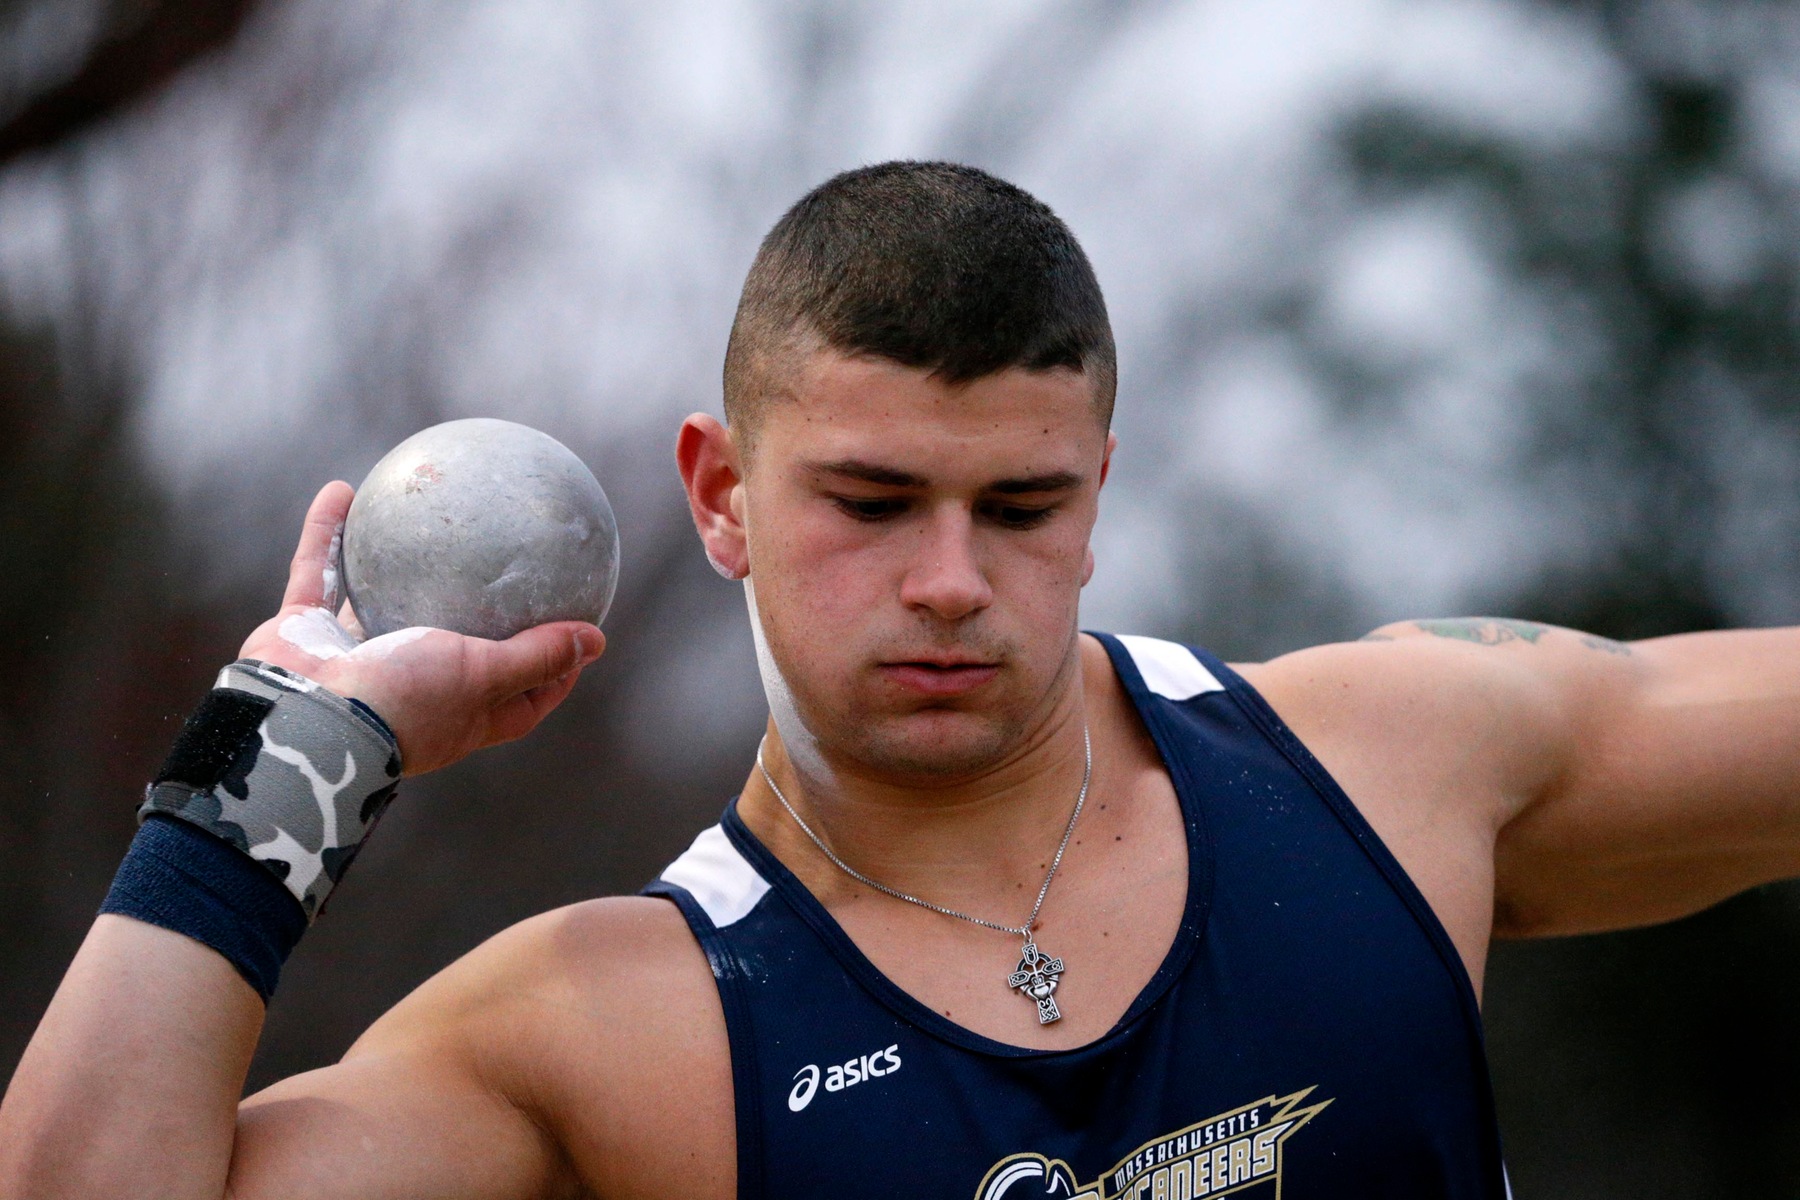 McCabe Wins Shot Put Event at MASCAC / New England Alliance Championships; Maritime Finished Men and Women Finish Last In Standings Among MASCAC Representatives